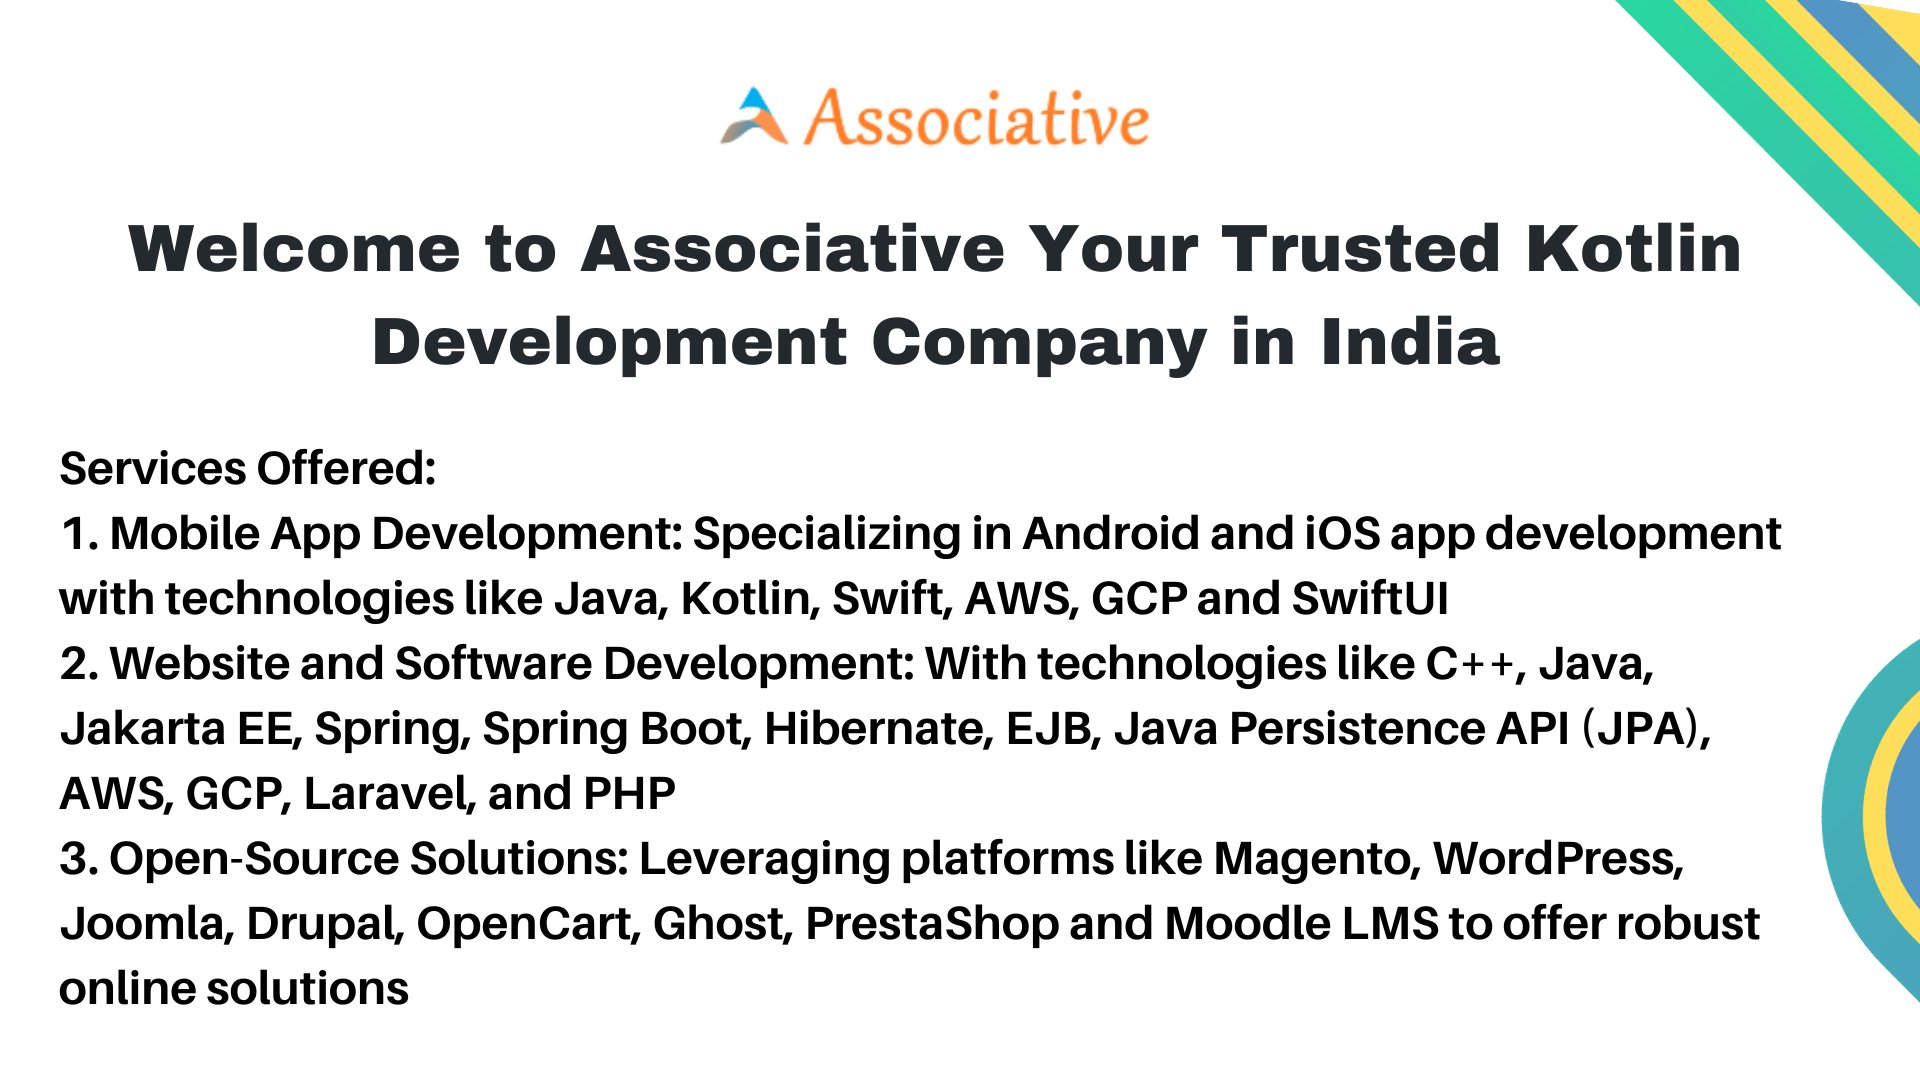 Welcome to Associative Your Trusted Kotlin Development Company in India